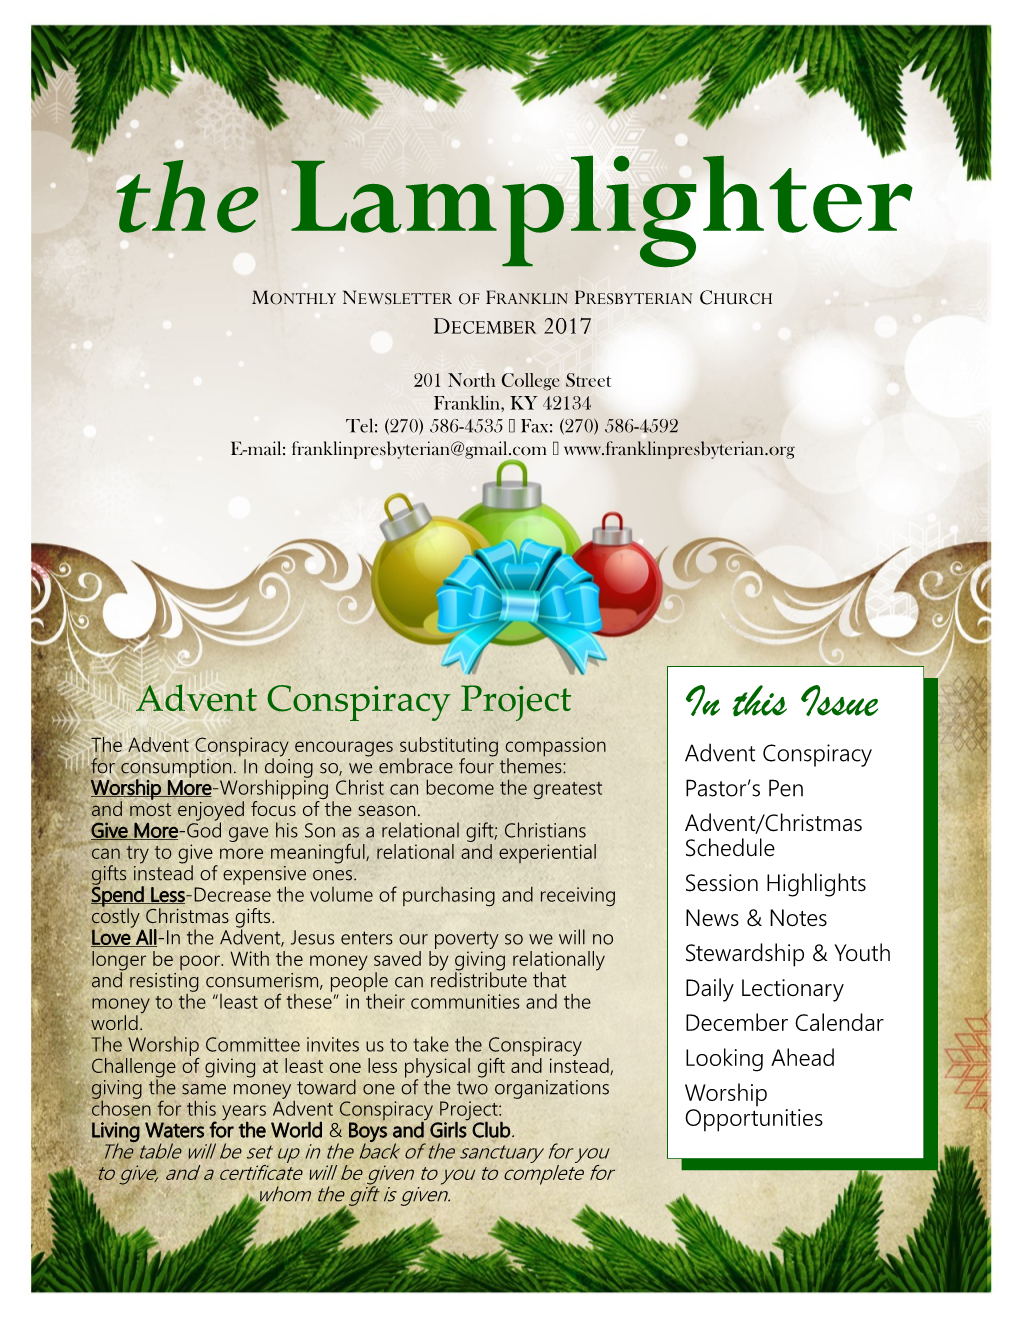 In This Issue the Advent Conspiracy11.5 Encourages Substituting Compassion Lo- Advent Conspiracy for Consumption